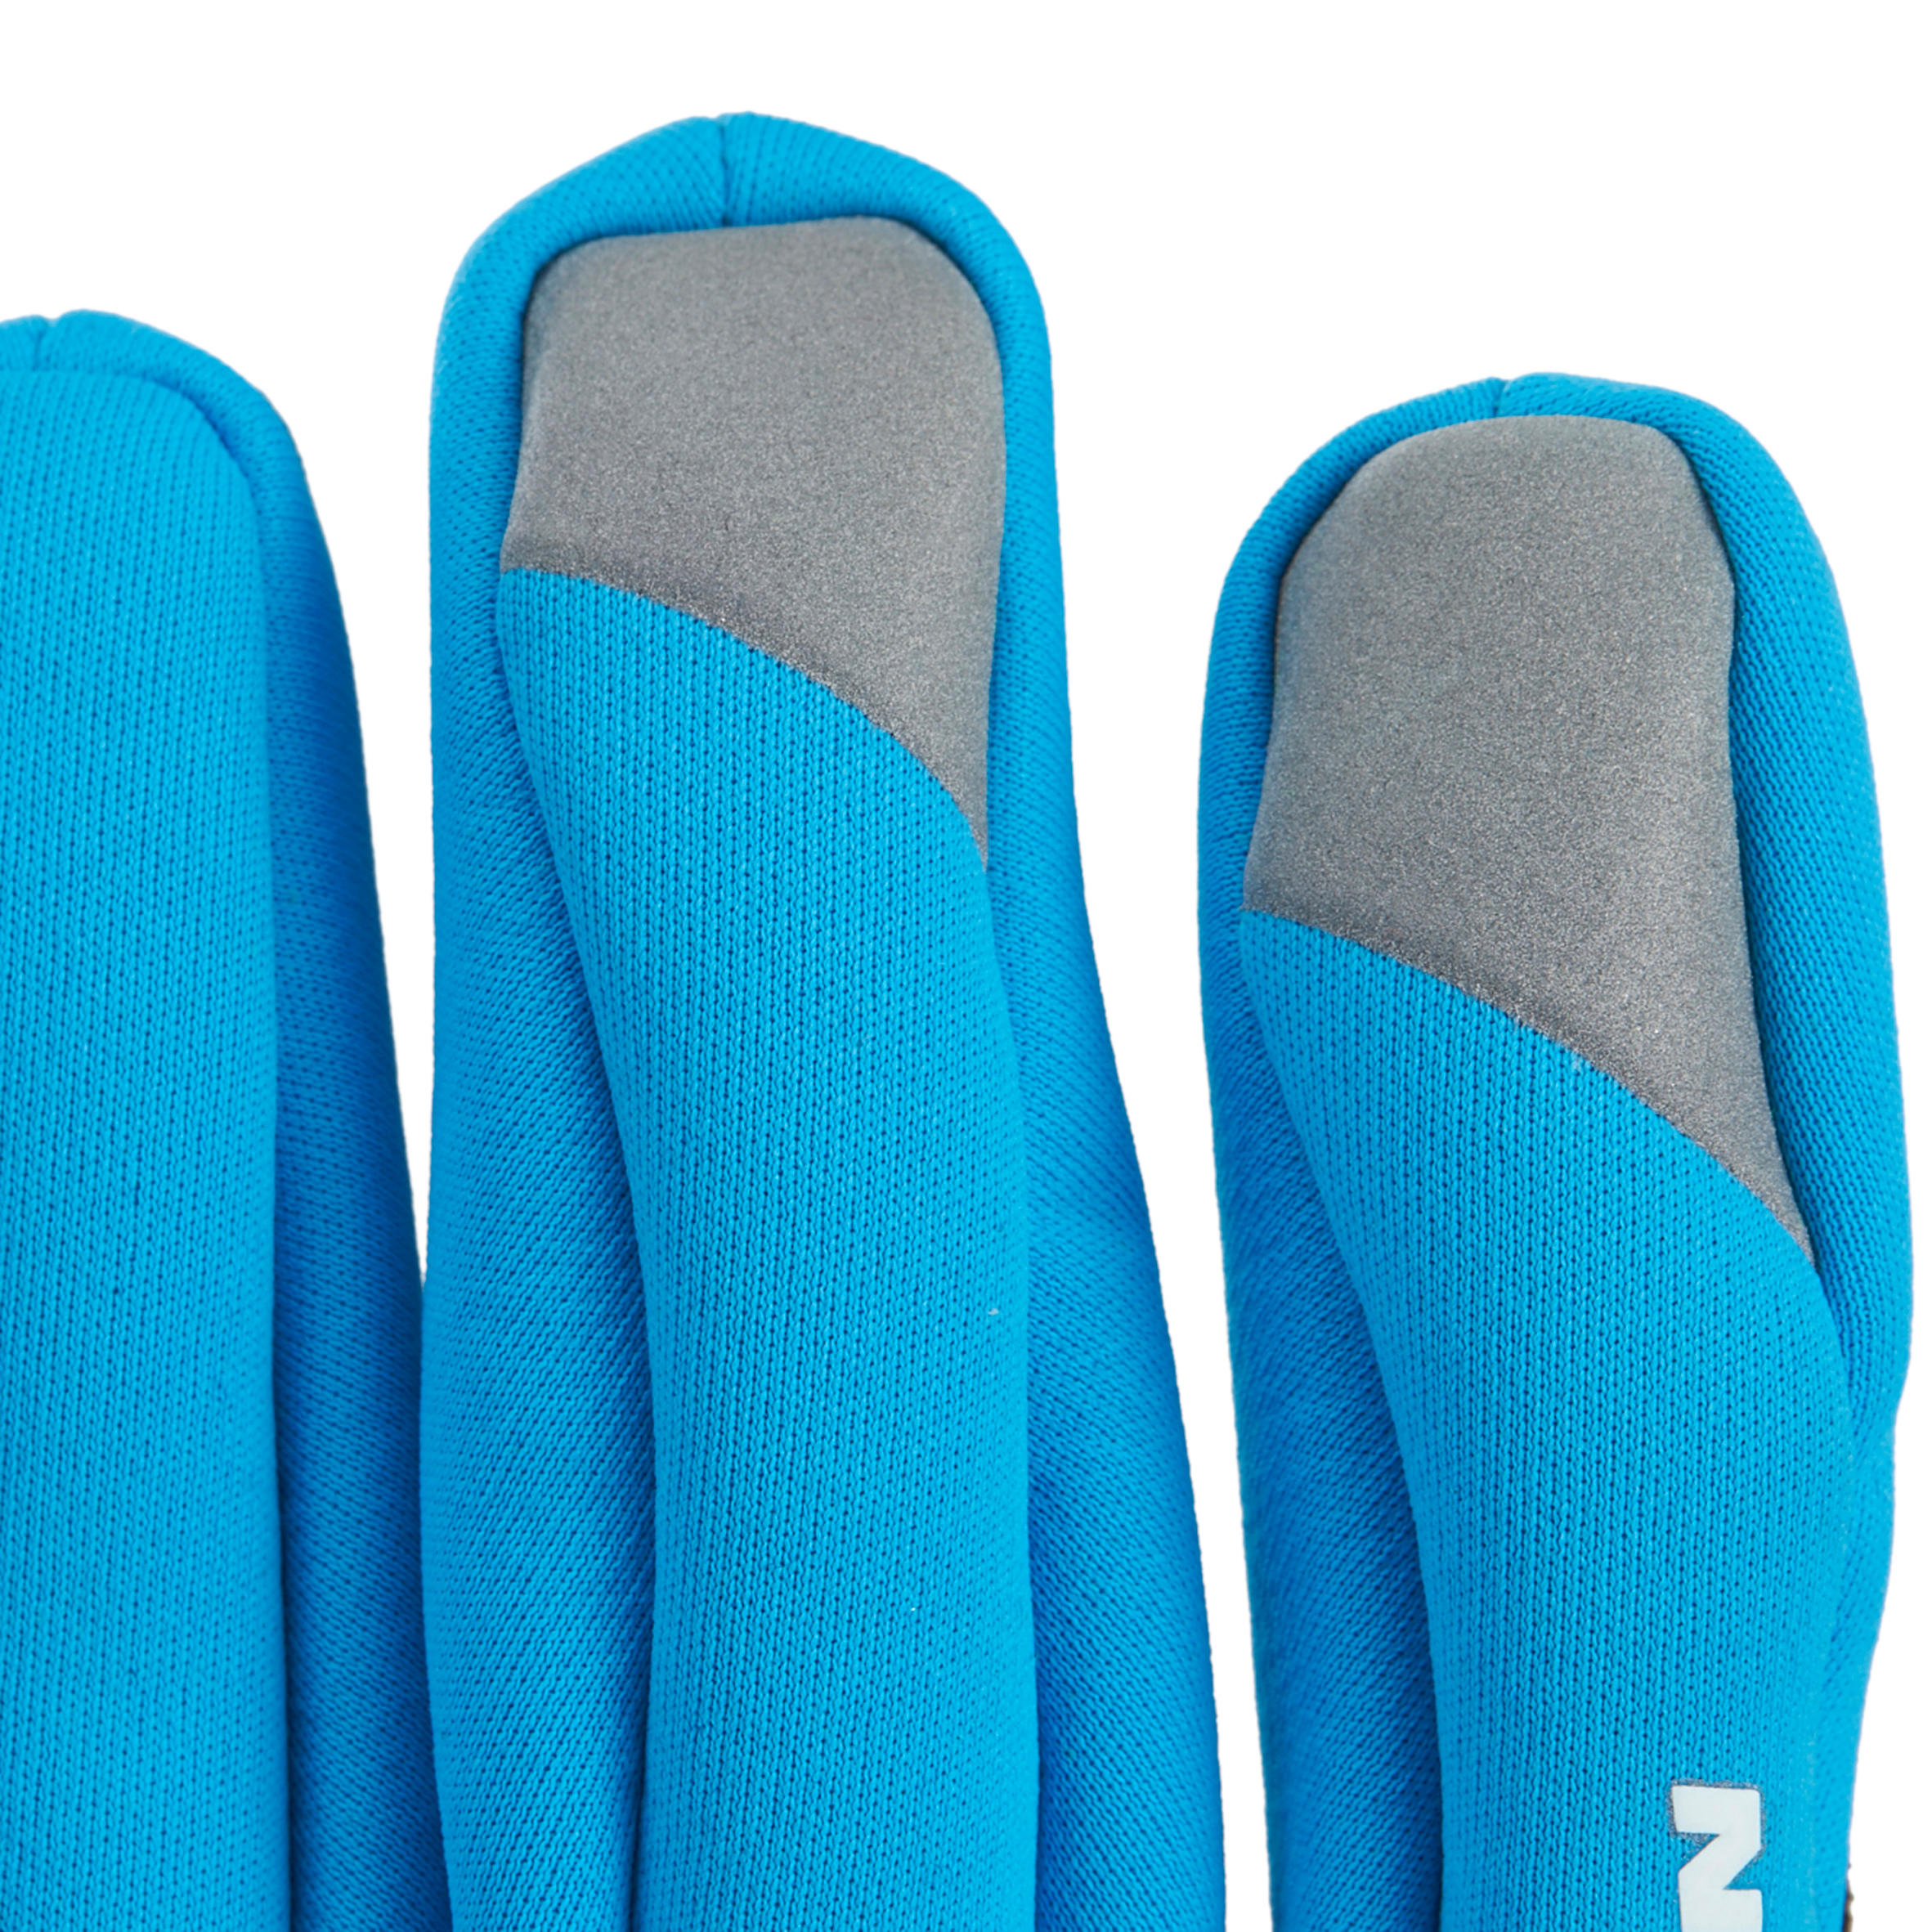 500 Winter Cycling Gloves - Blue 5/10